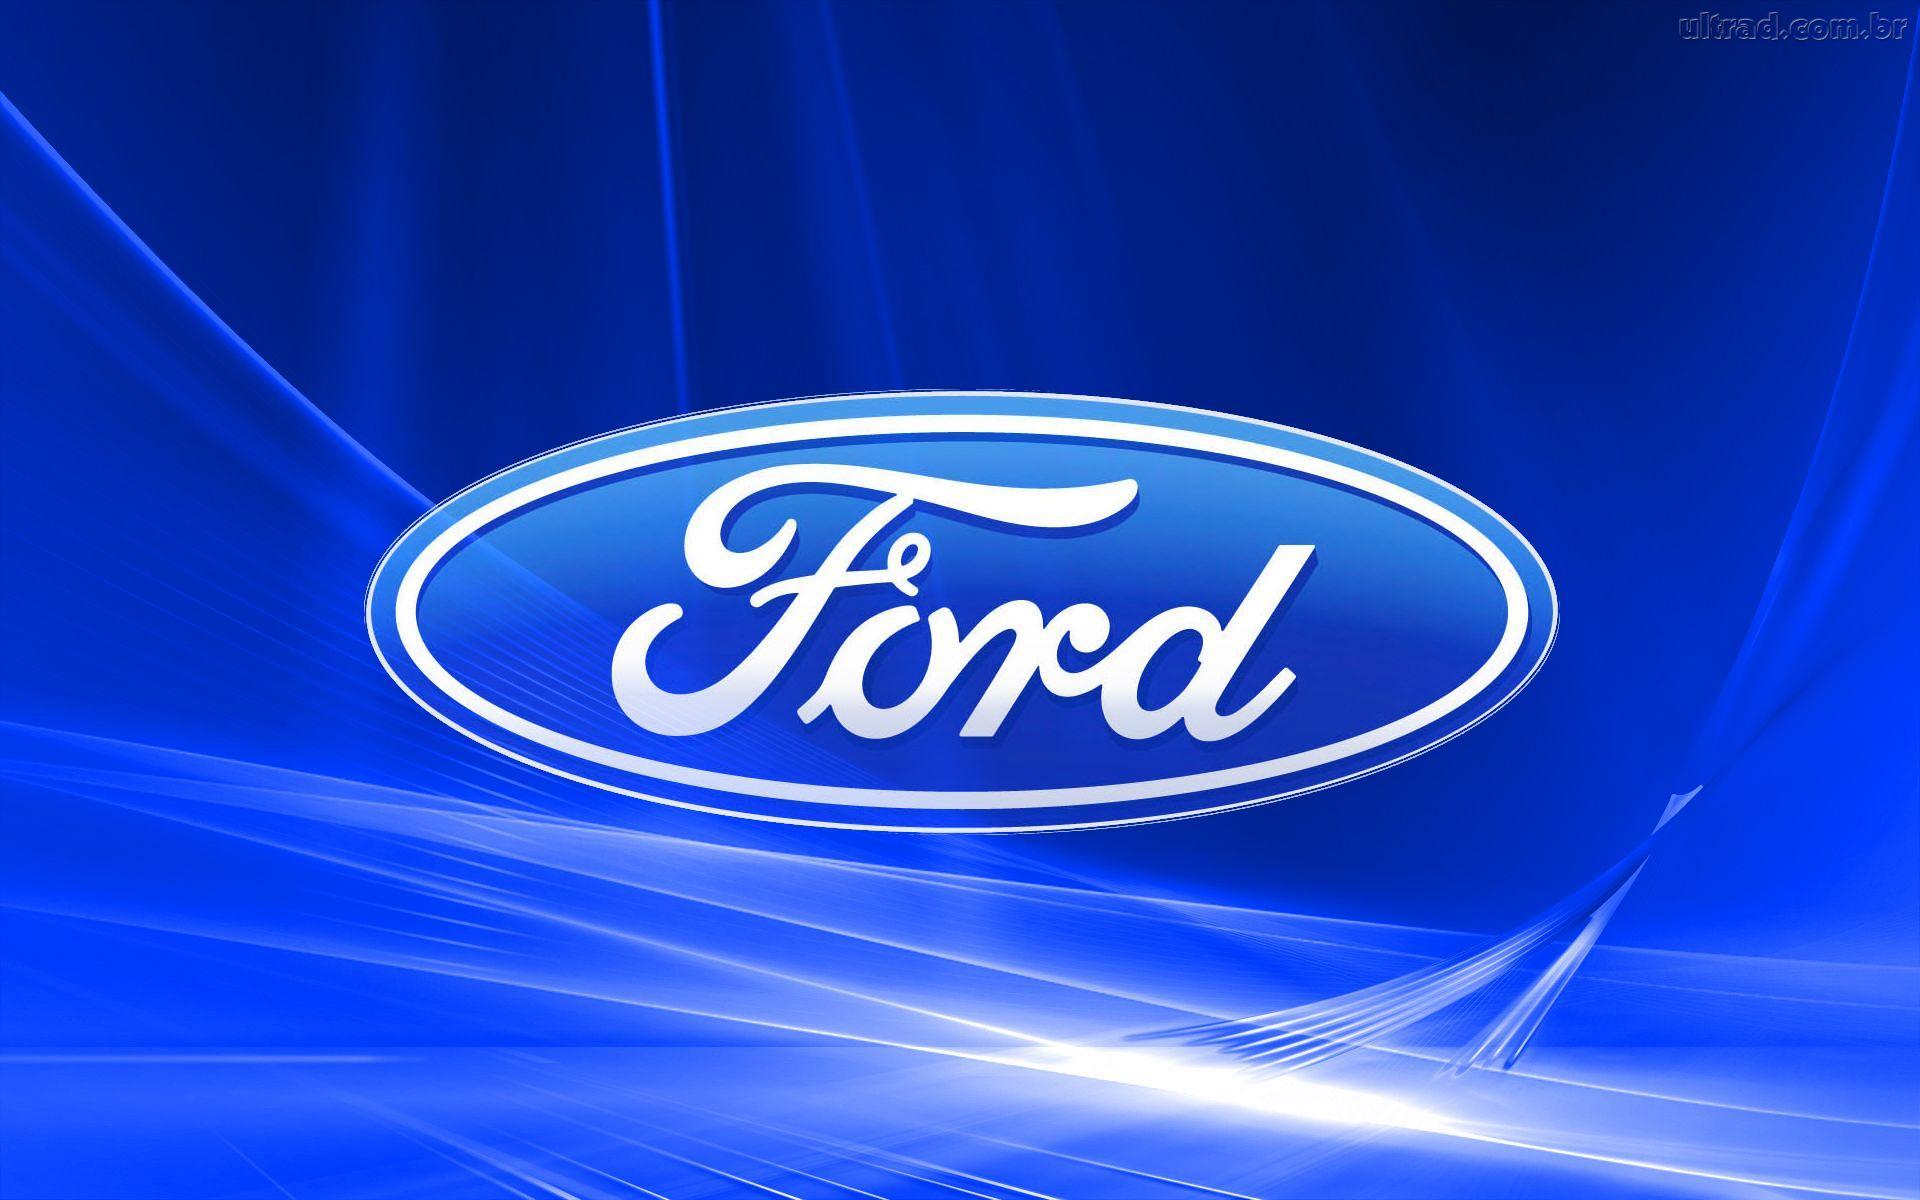 Ford Logo Wallpapers 10330 Wallpapers HD